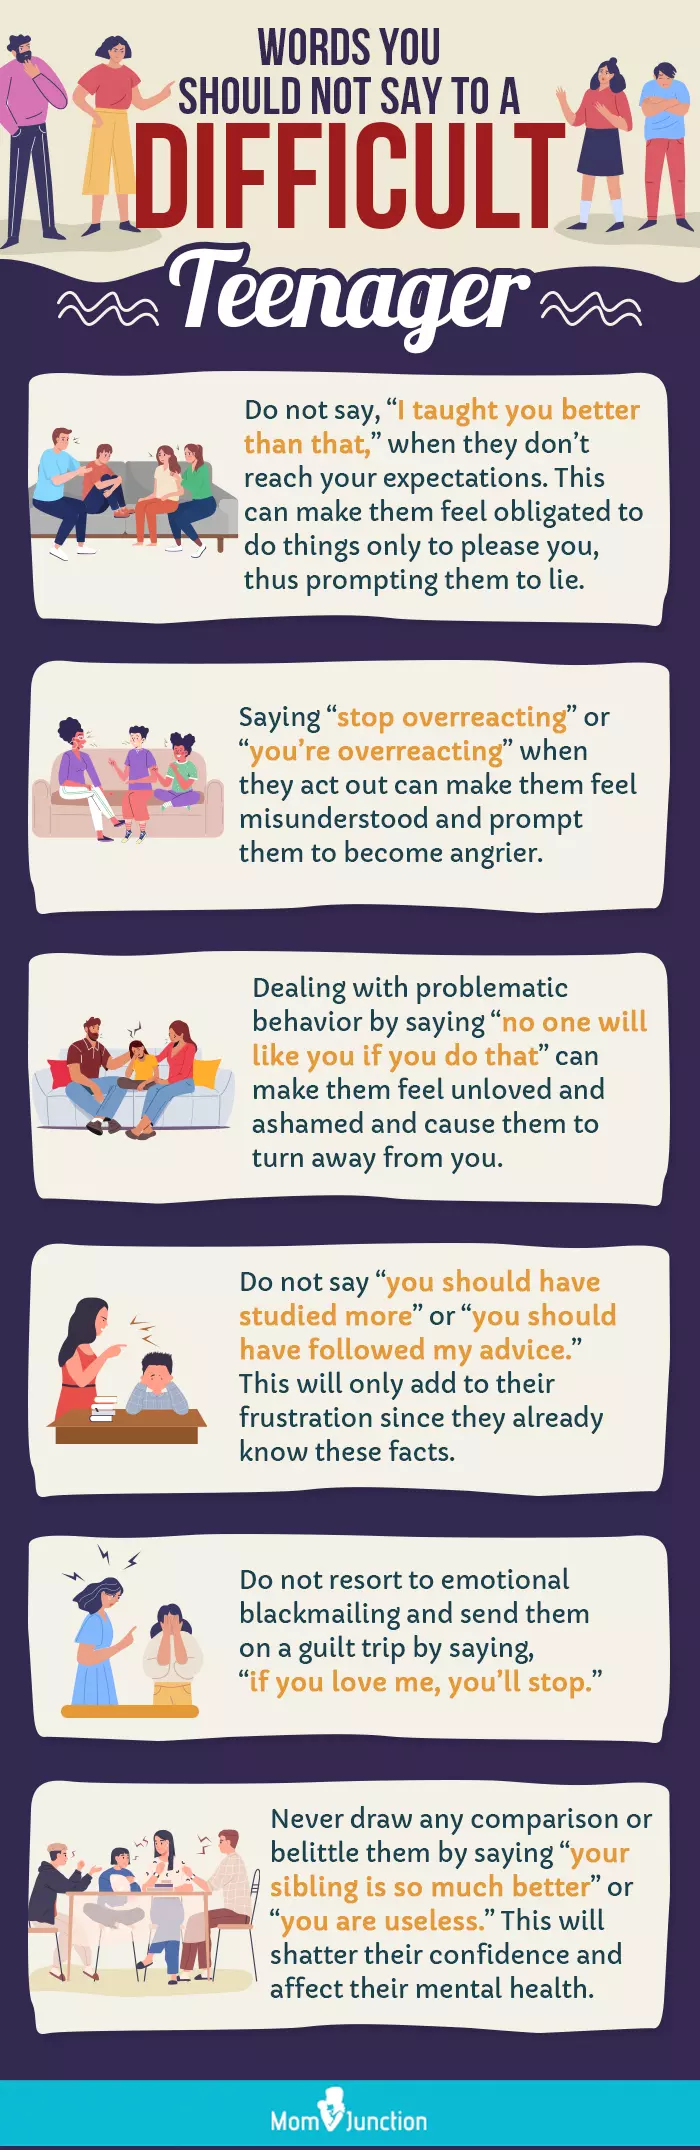 words you should not say to a difficult teenager (infographic)